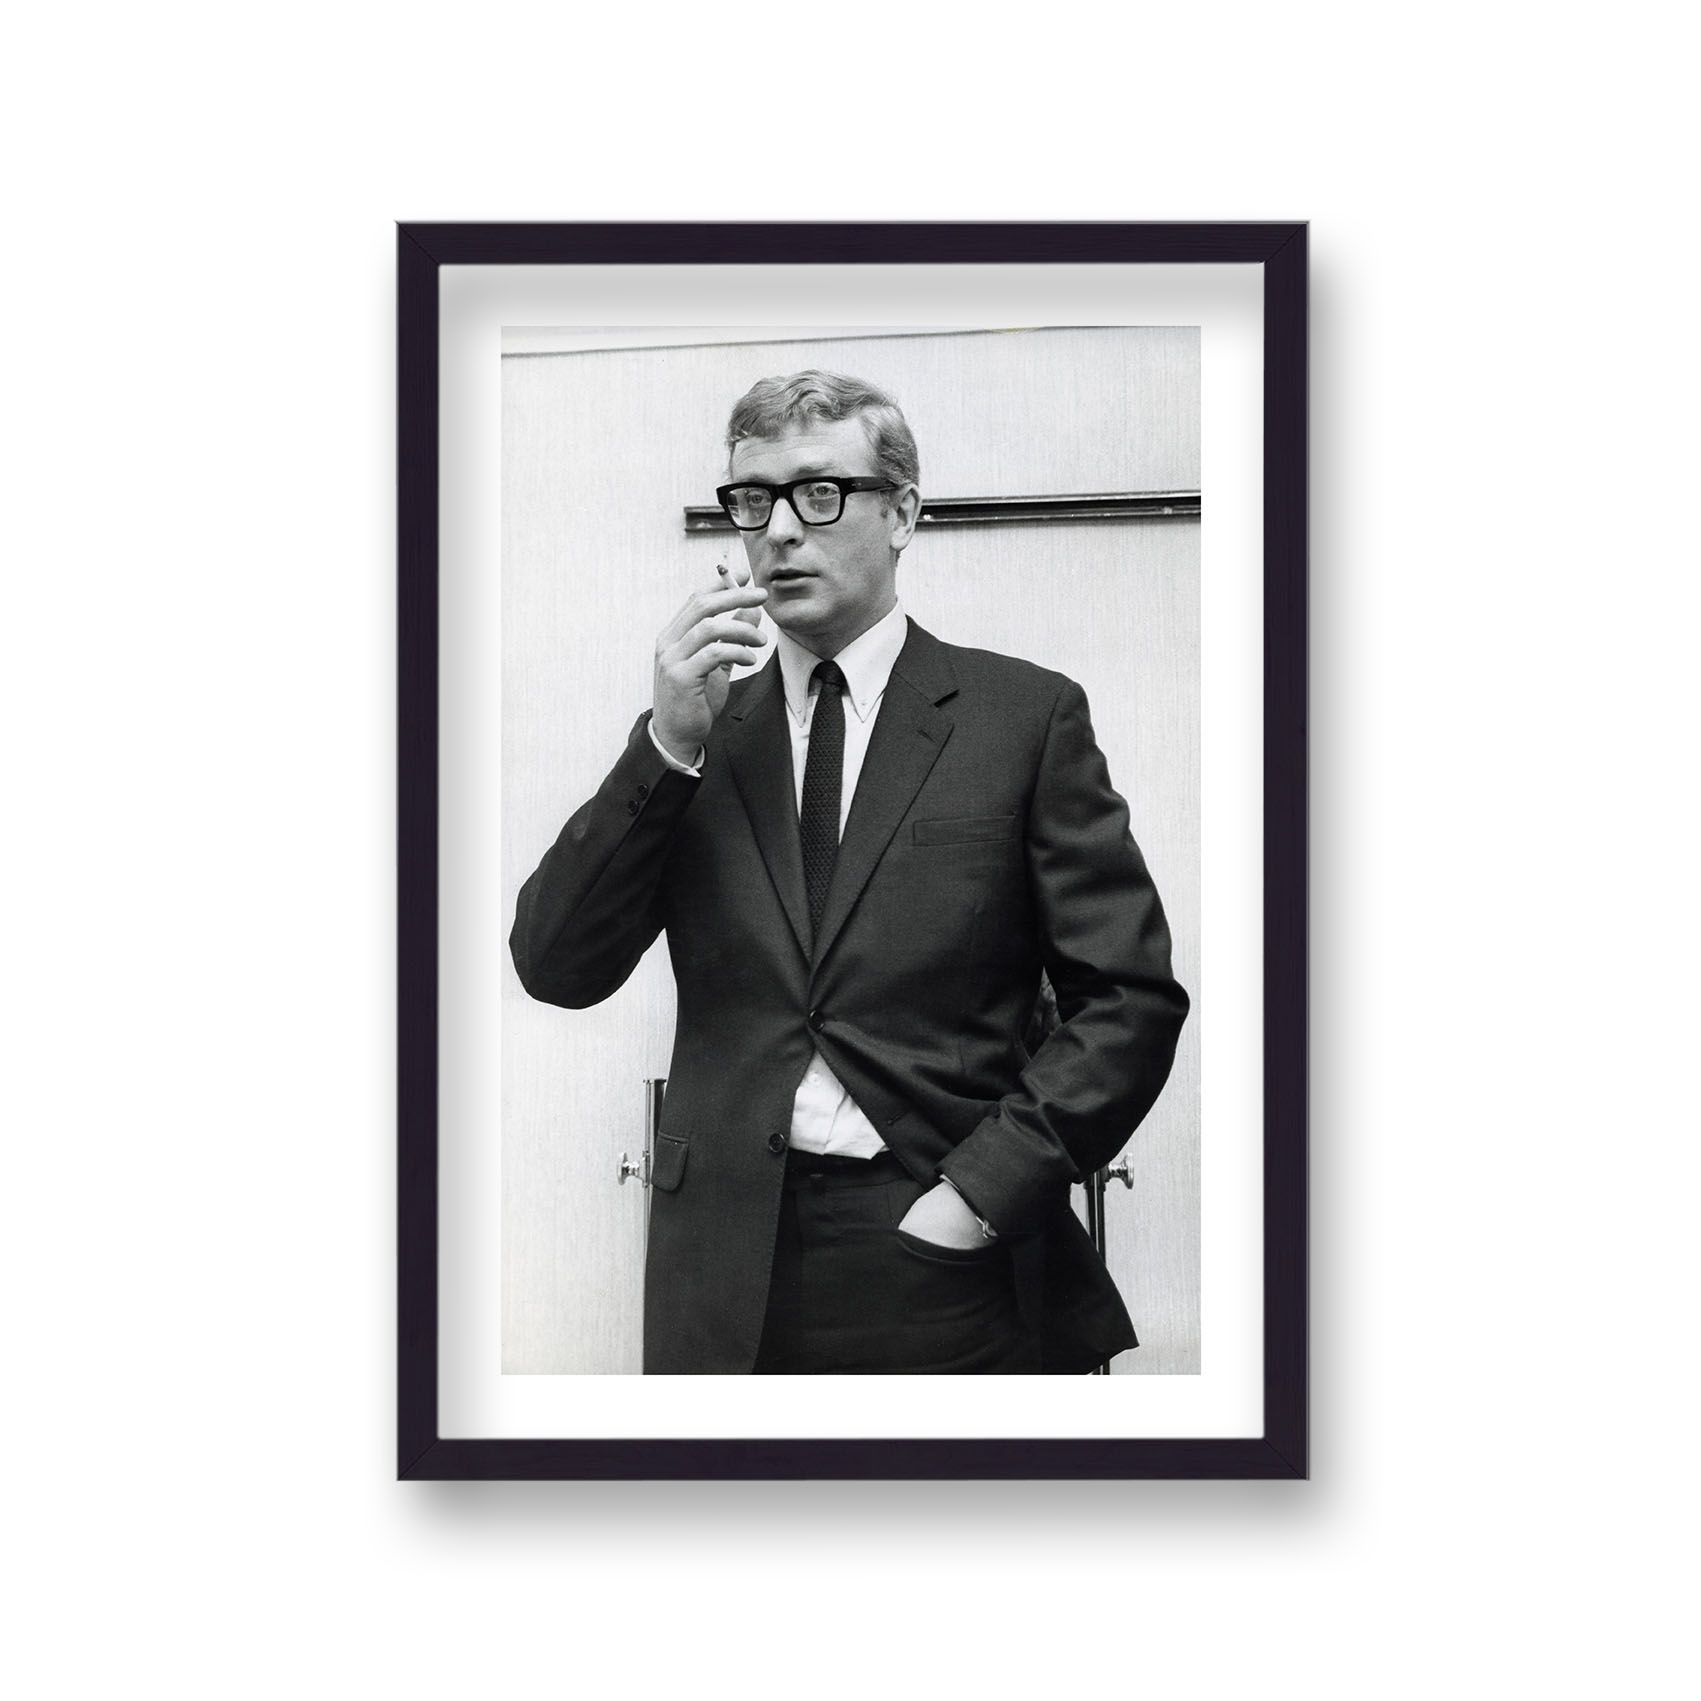 Michael Caine in Relaxed Mood Smoking Cigarette During Photo Shoot Vintage Icon Print